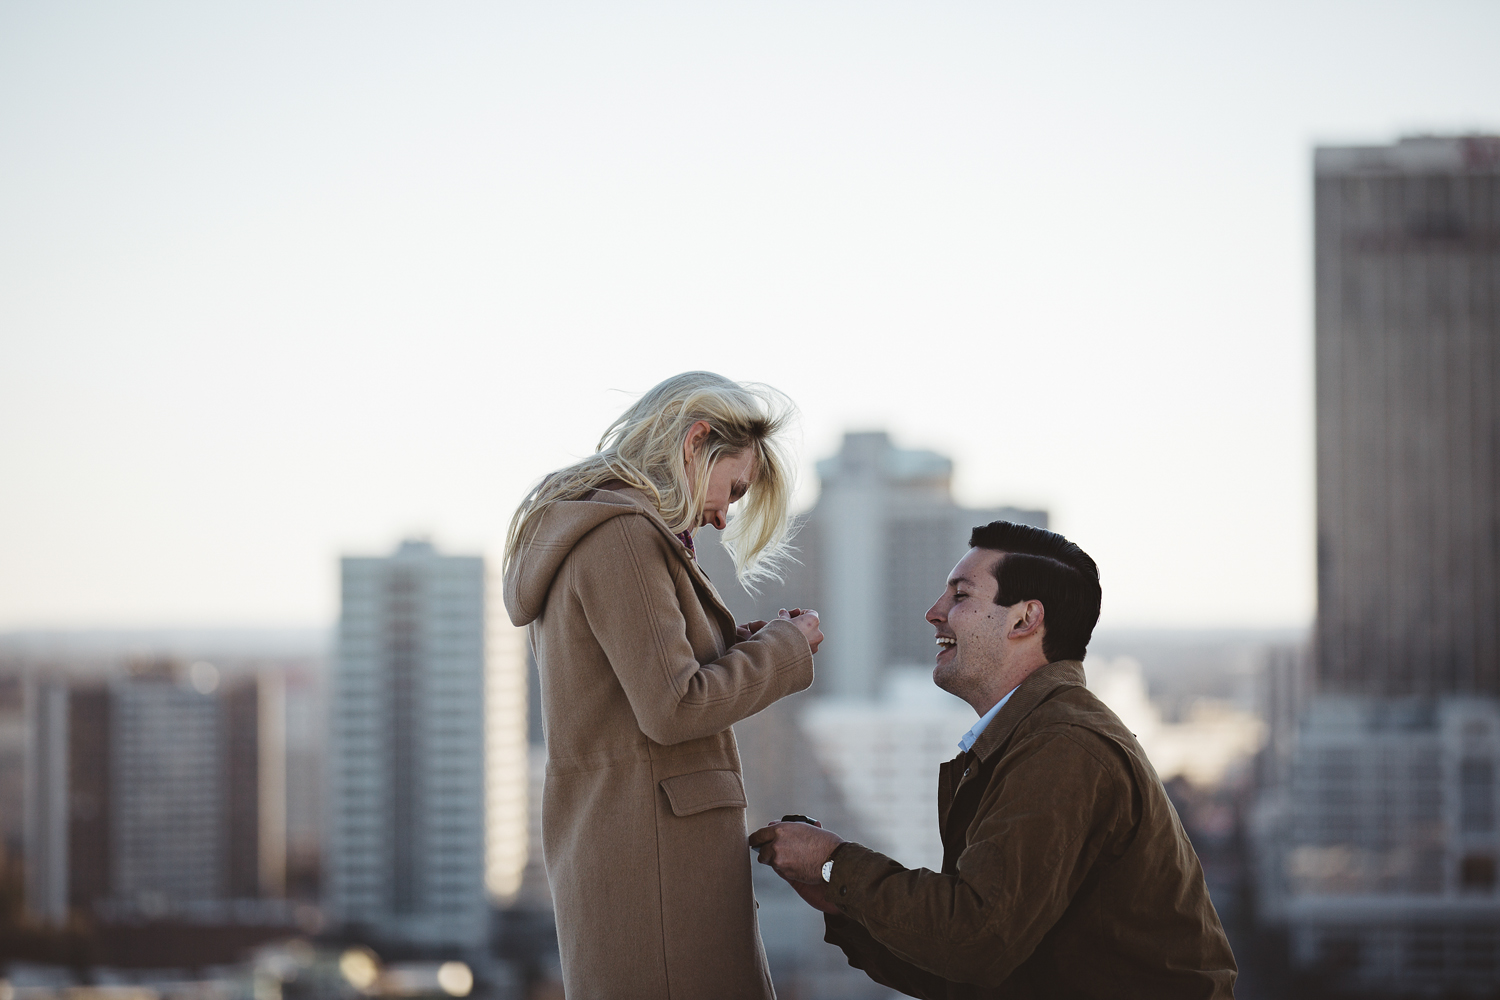 KDP_claire&drew - the proposal-16.jpg